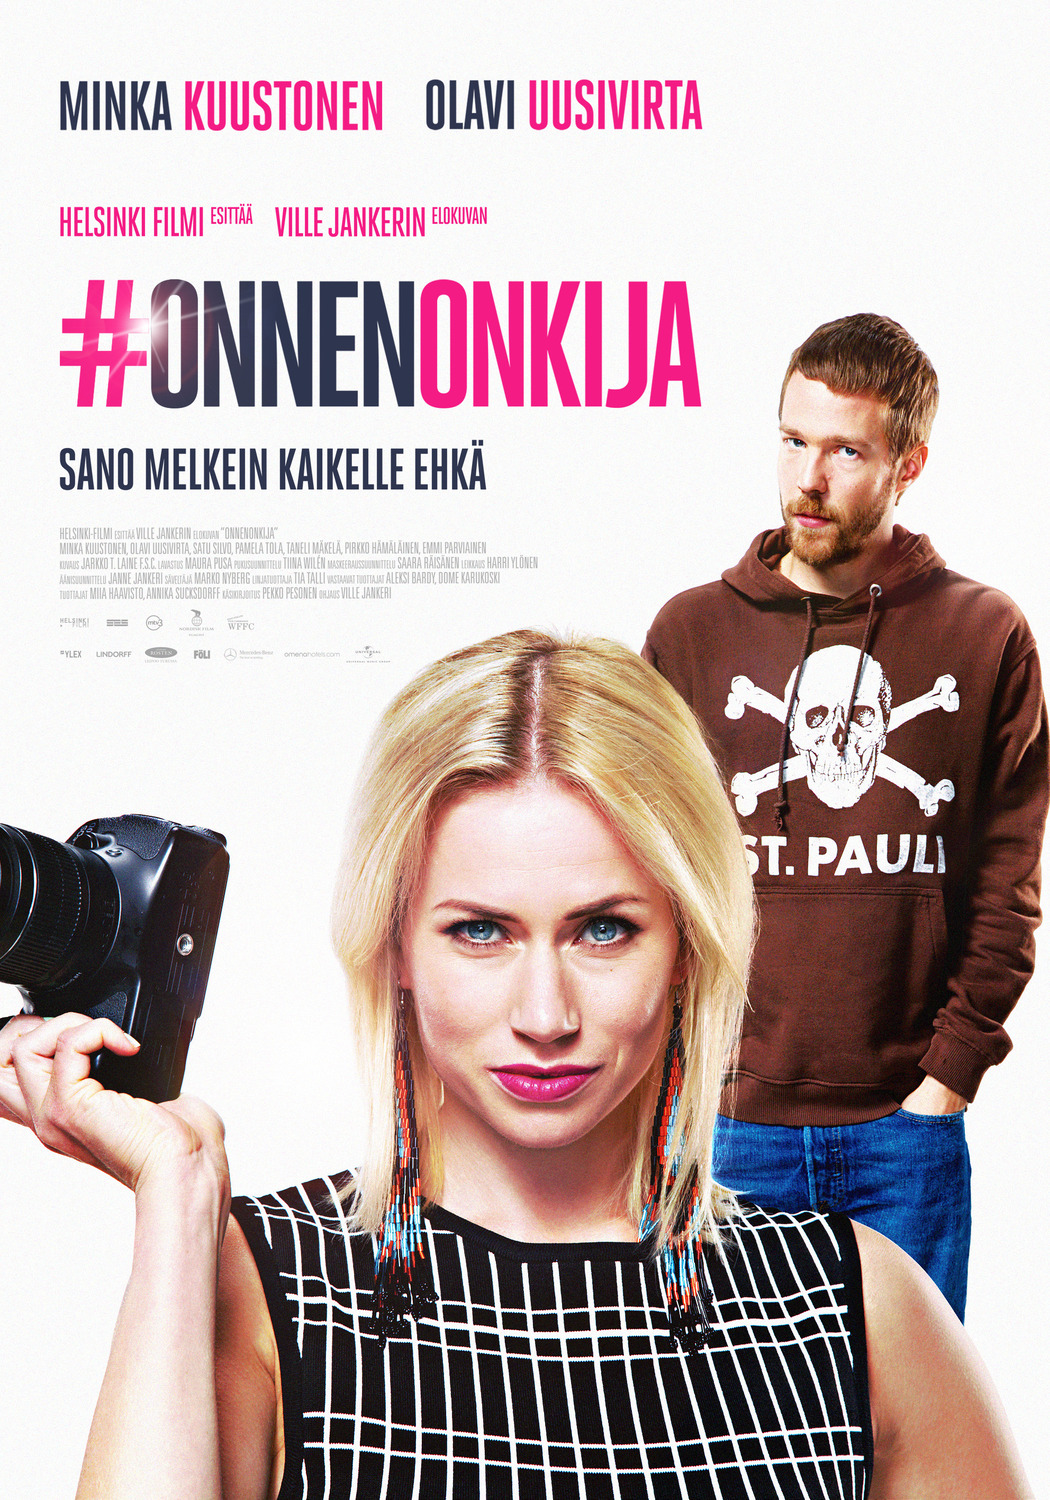 Extra Large Movie Poster Image for Onnenonkija 